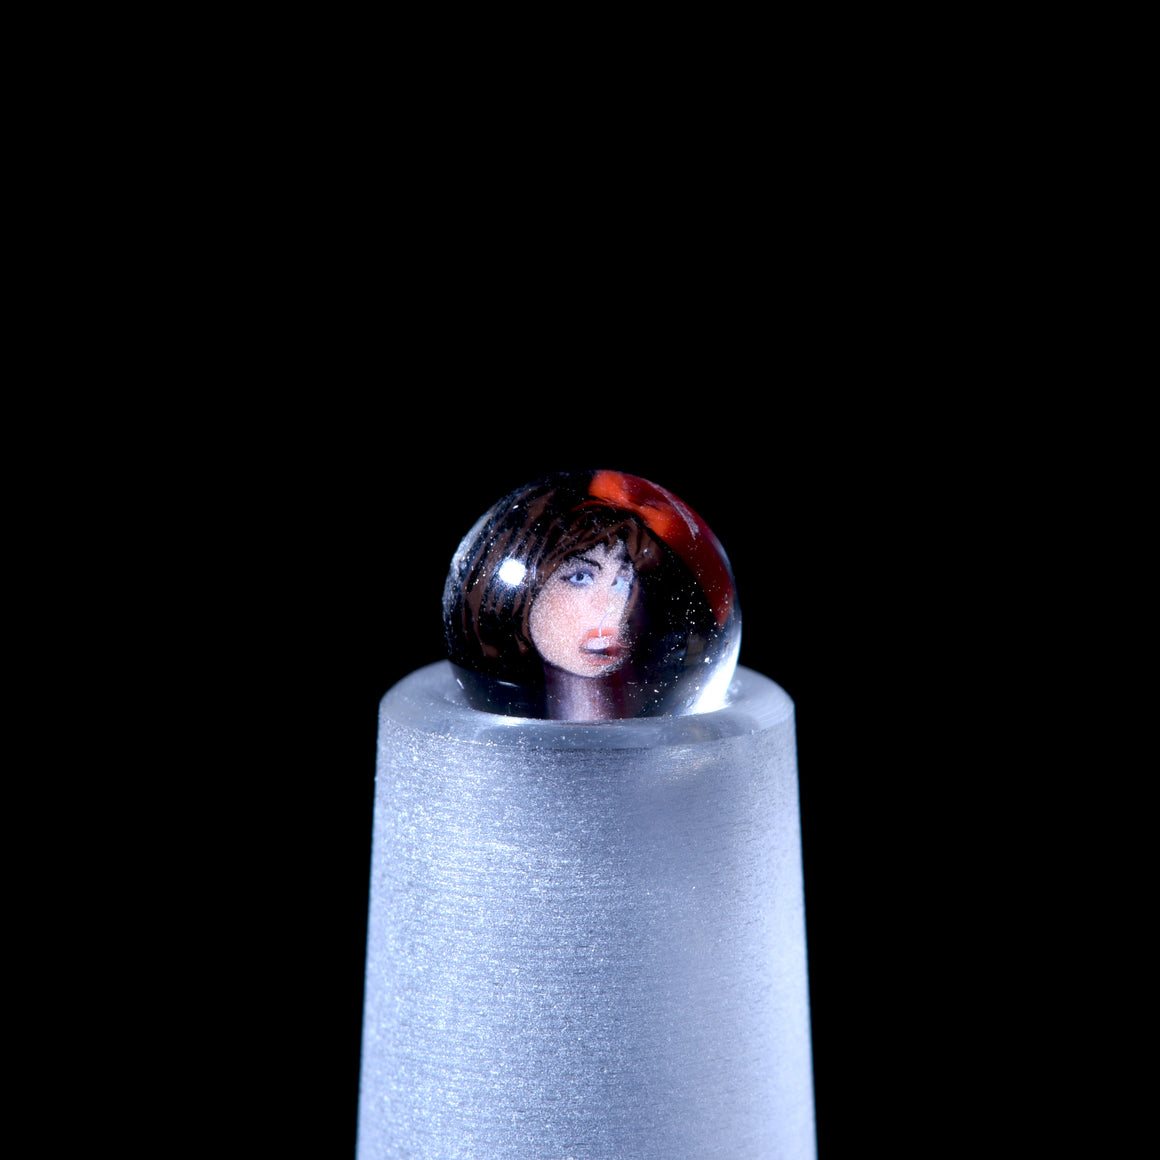 ~6mm Boro-encased Millie Terp Pearl by Ryan McCluer - Sexy Snow White